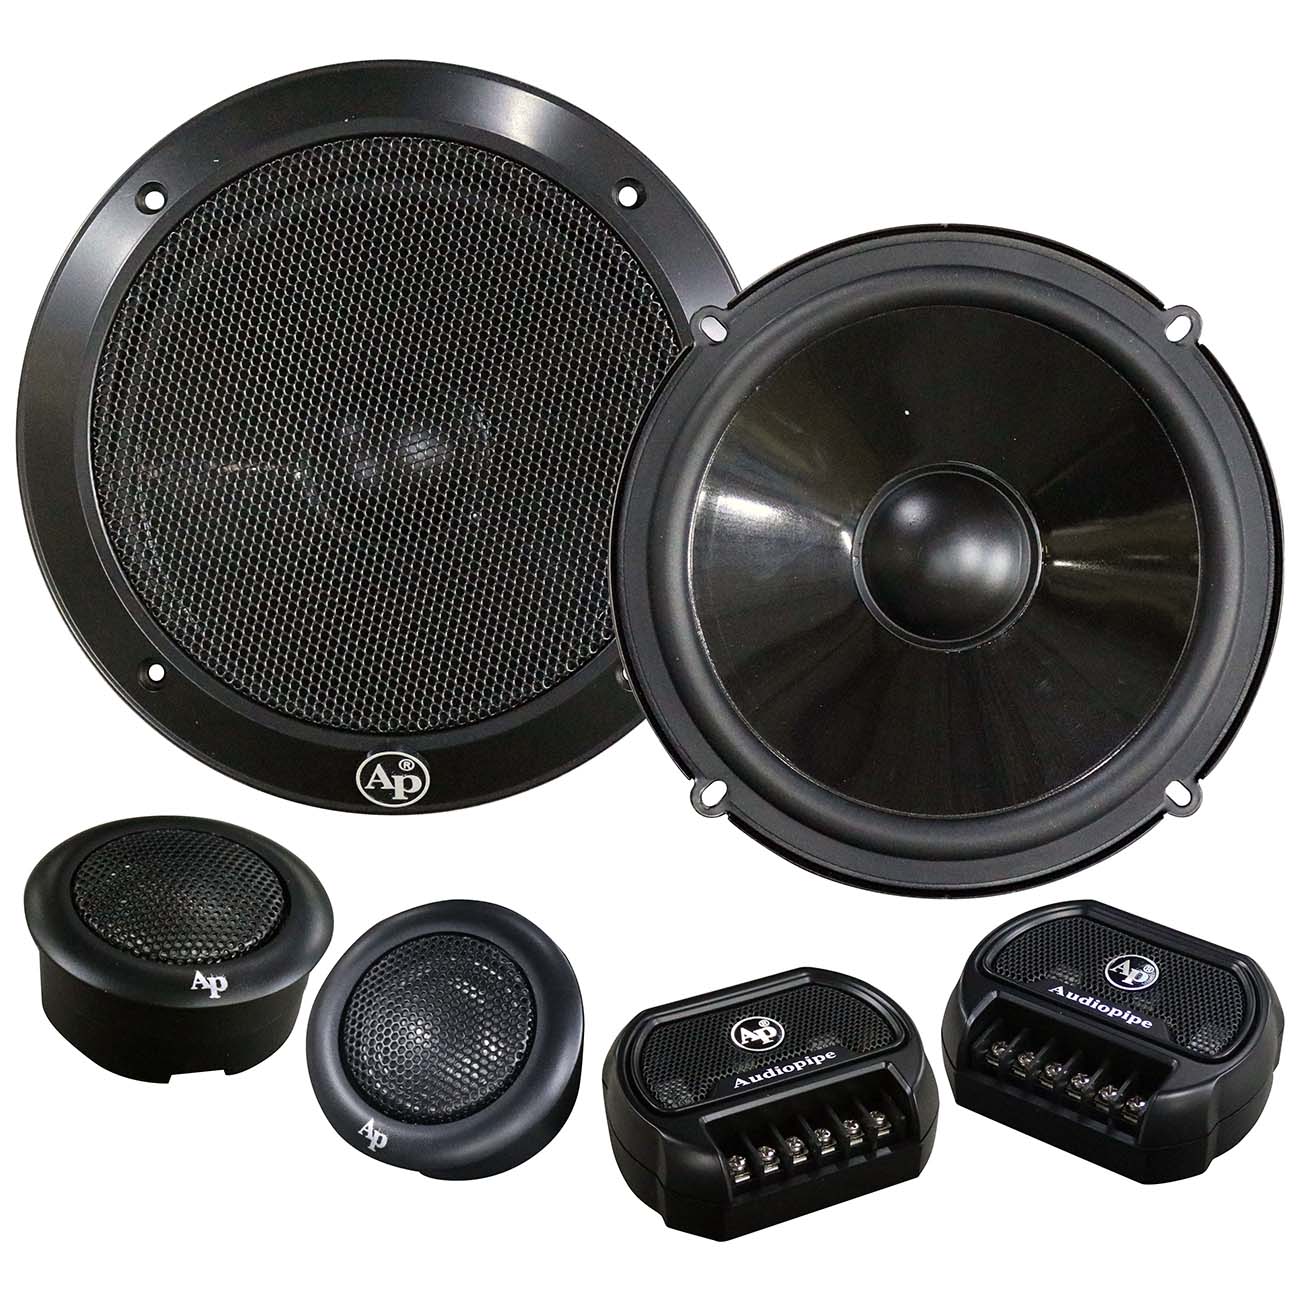 Audiopipe CPL6500 6-3/4″ Component Speaker System 80W Rms / 250W Max 4 Ohm